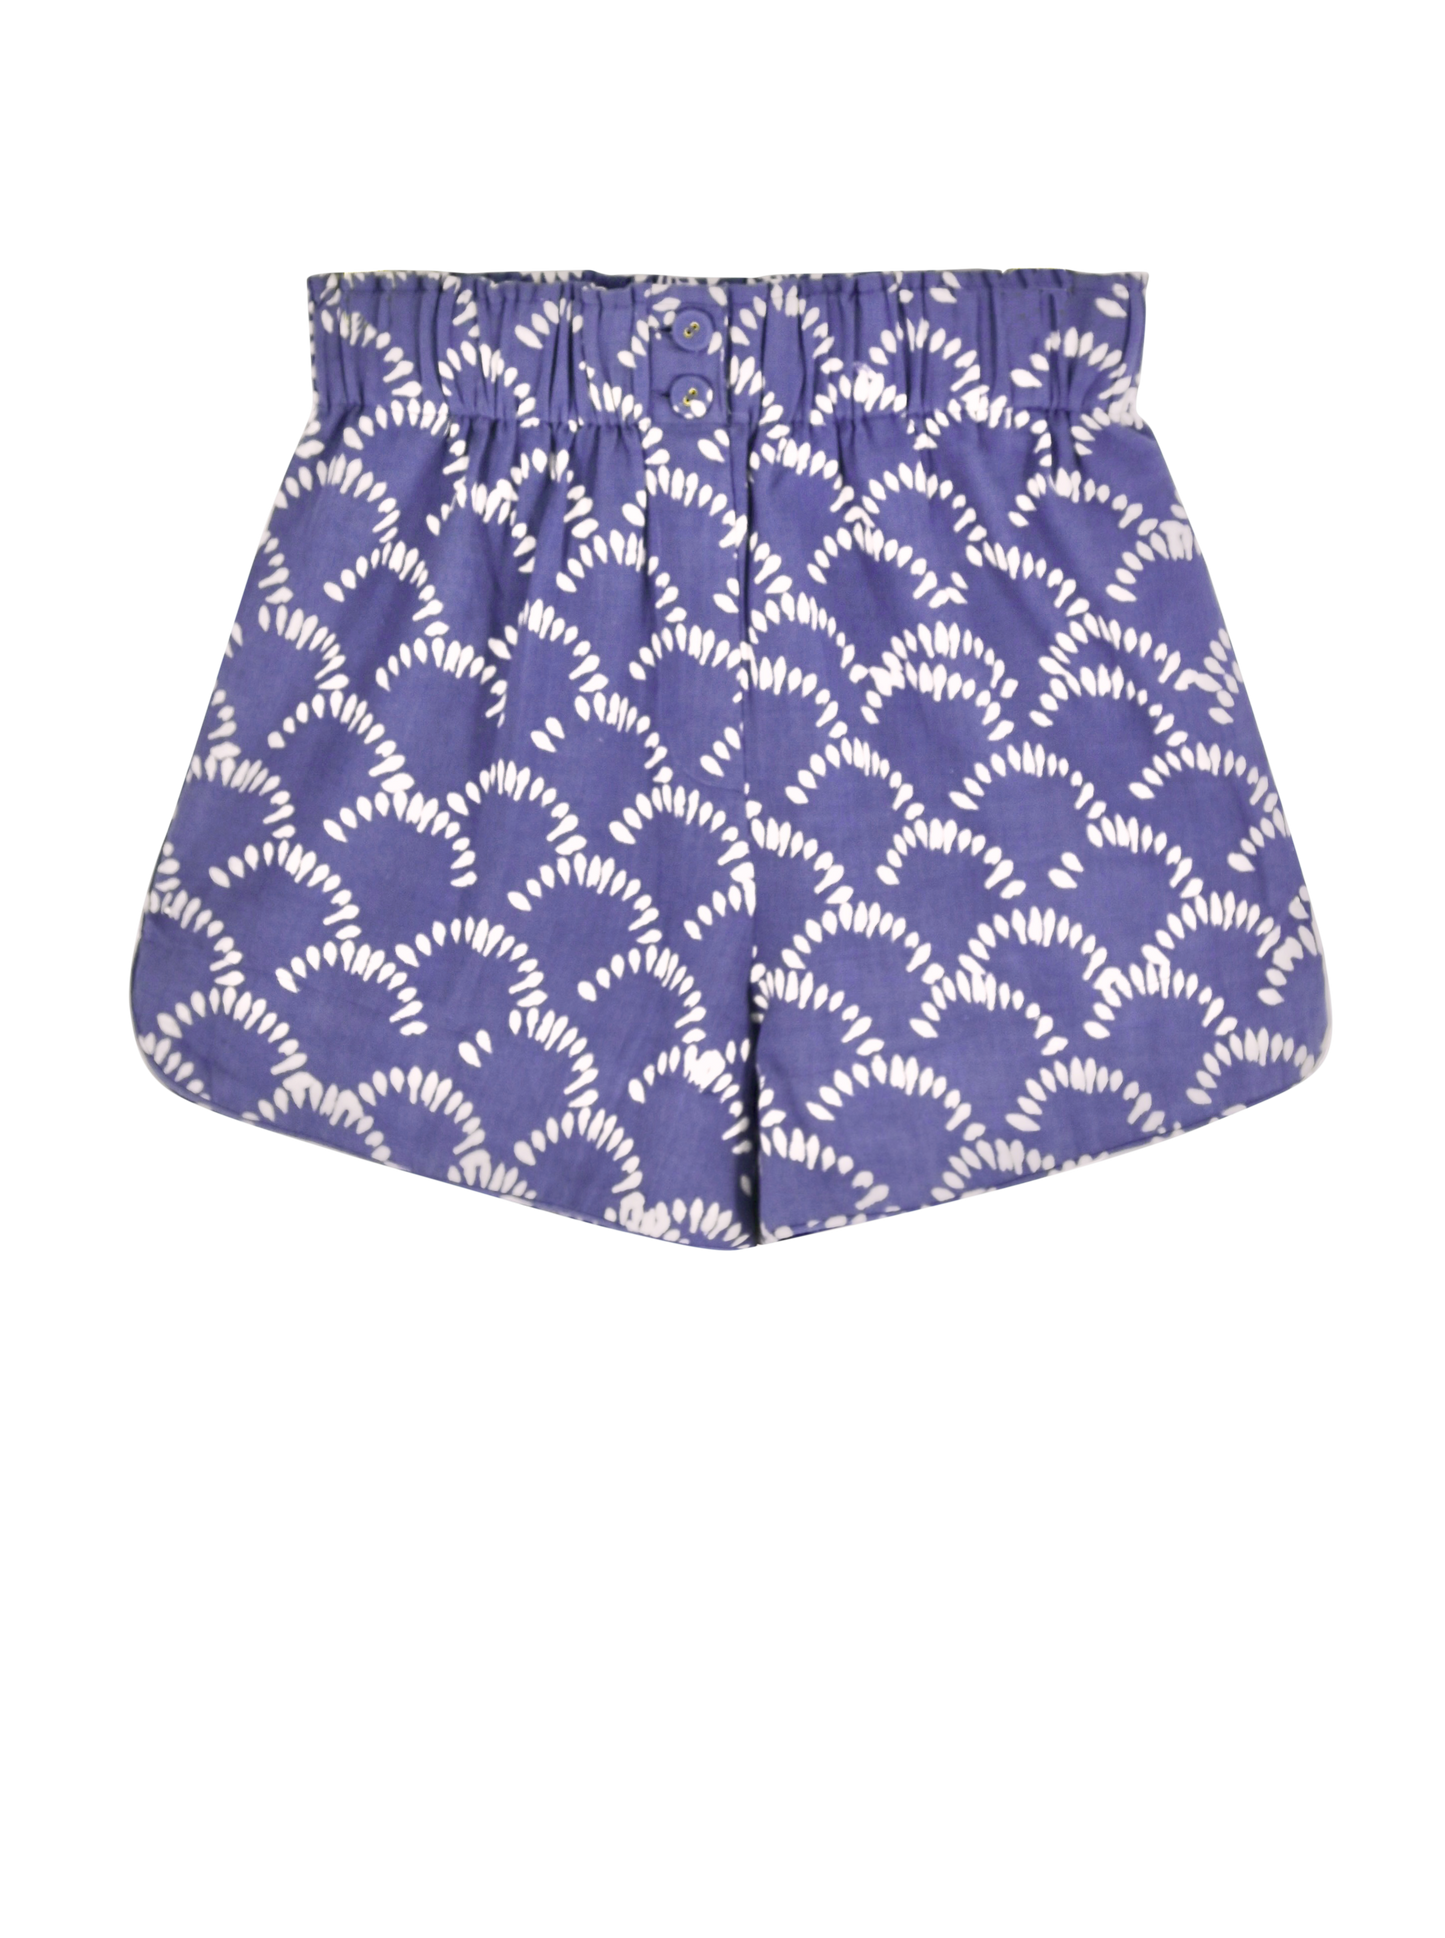 The casual track short is dressed up with a new print for summer. Dress it up or just toss it in your beach bag for a cover-up. The fit of this short is flattering and comfortable. Ethically made with 100% cotton in India.